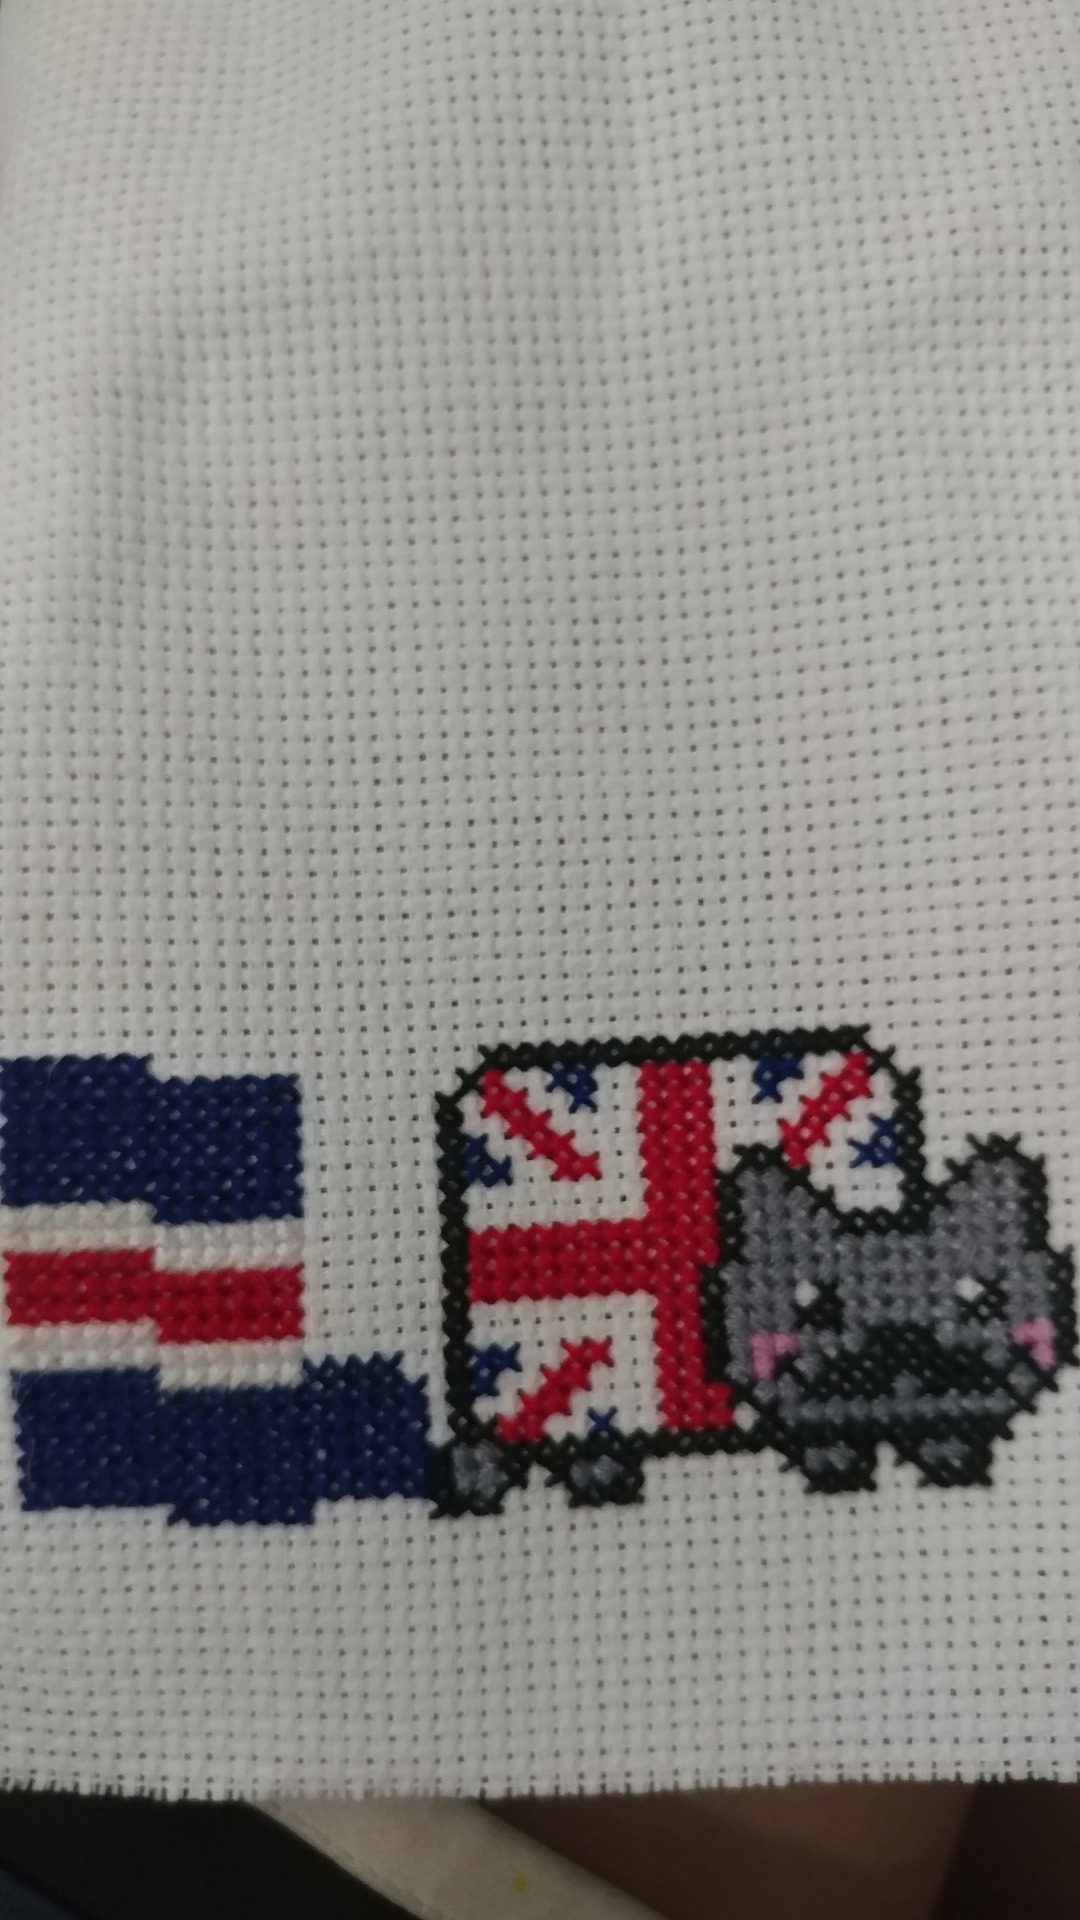 A cute British nyan cat that I&rsquo;m almost done with.  I&rsquo;m sick